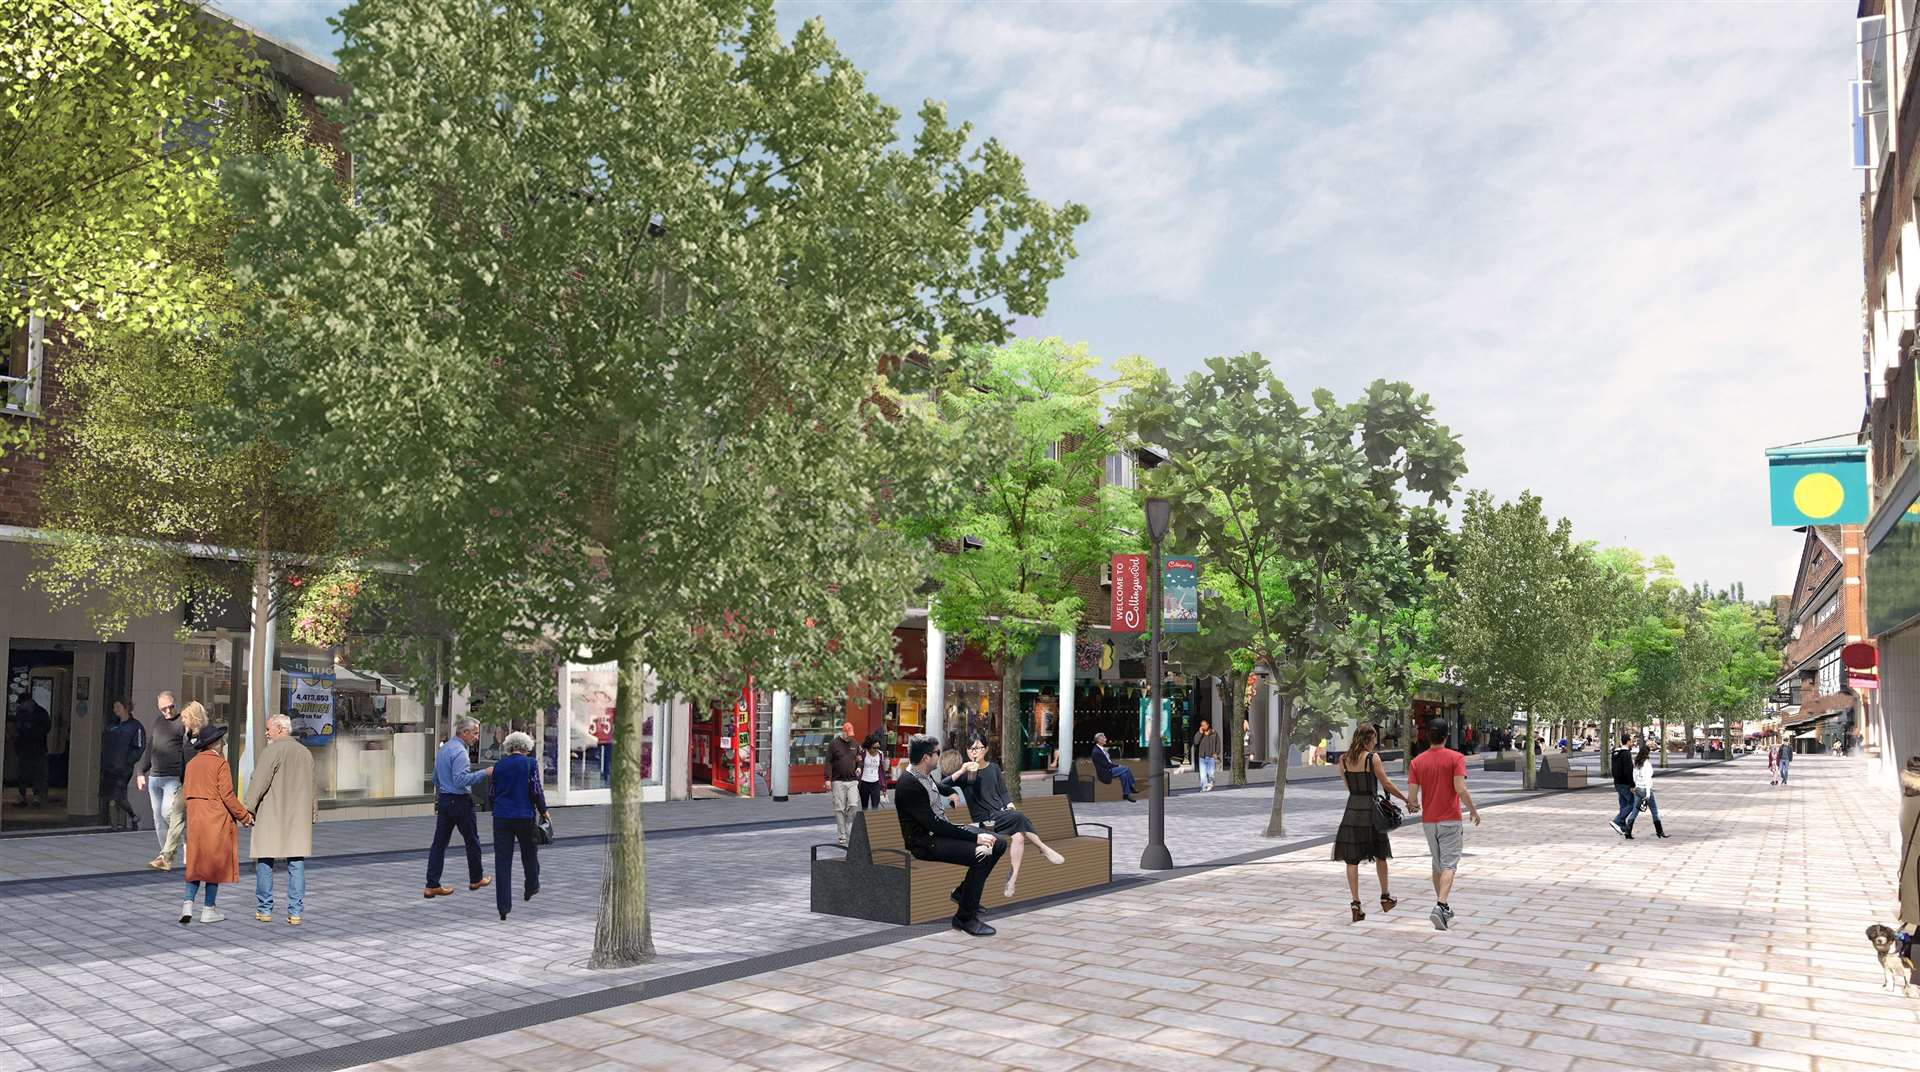 The council wants to create a boulevard-style street. Doing so, will spell the end for the long-running market